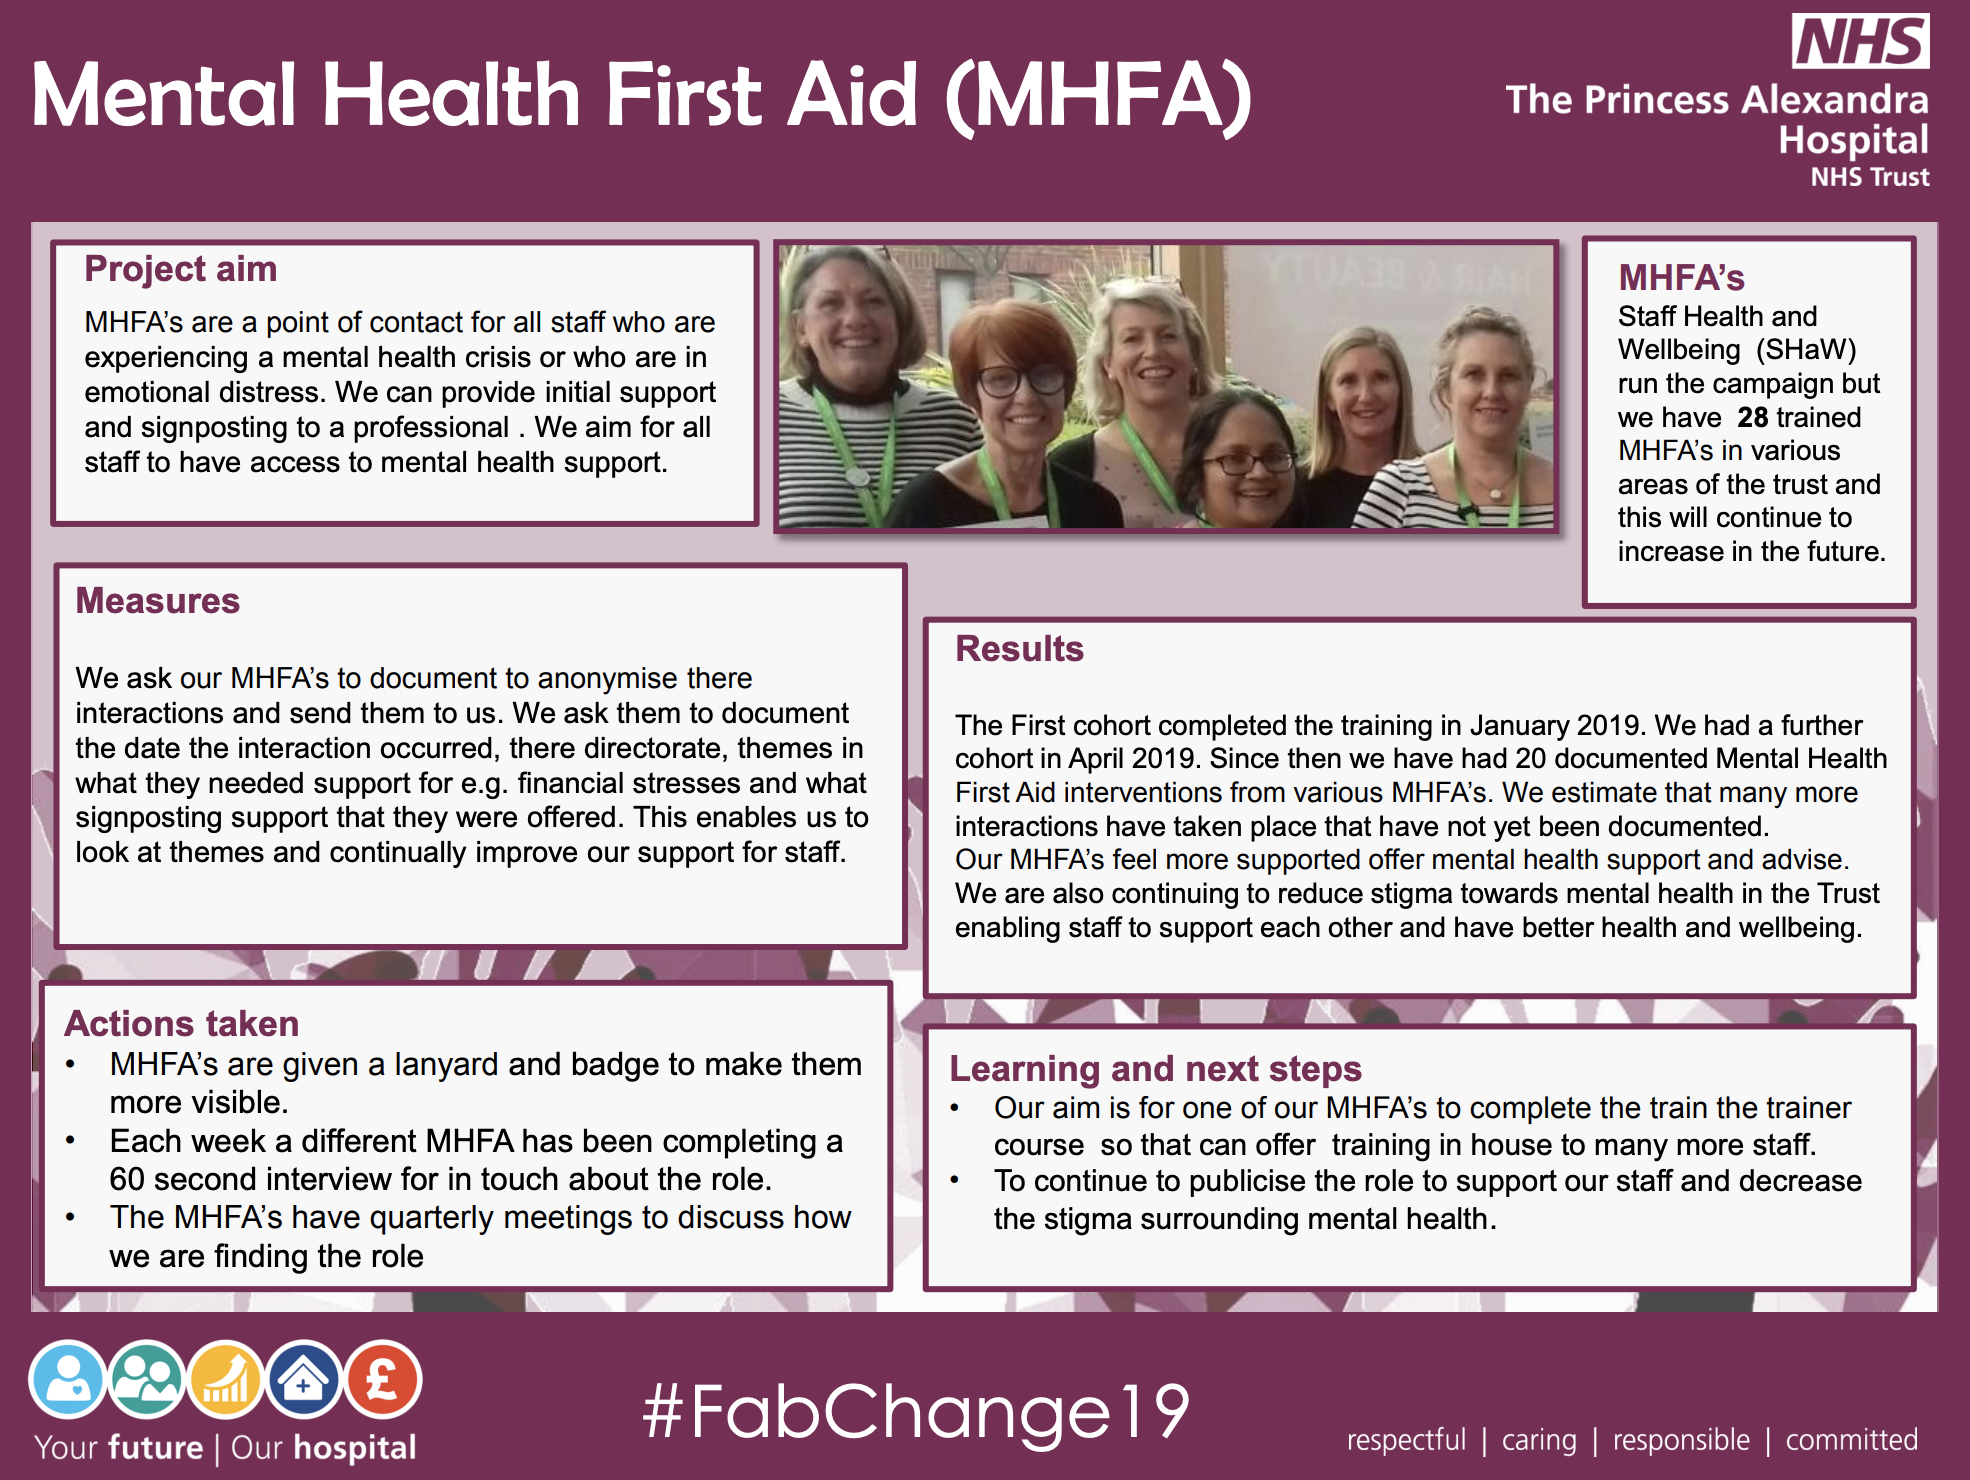 PAHT - Mental Health First Aid (MHFA) - @QualityFirstPAH featured image